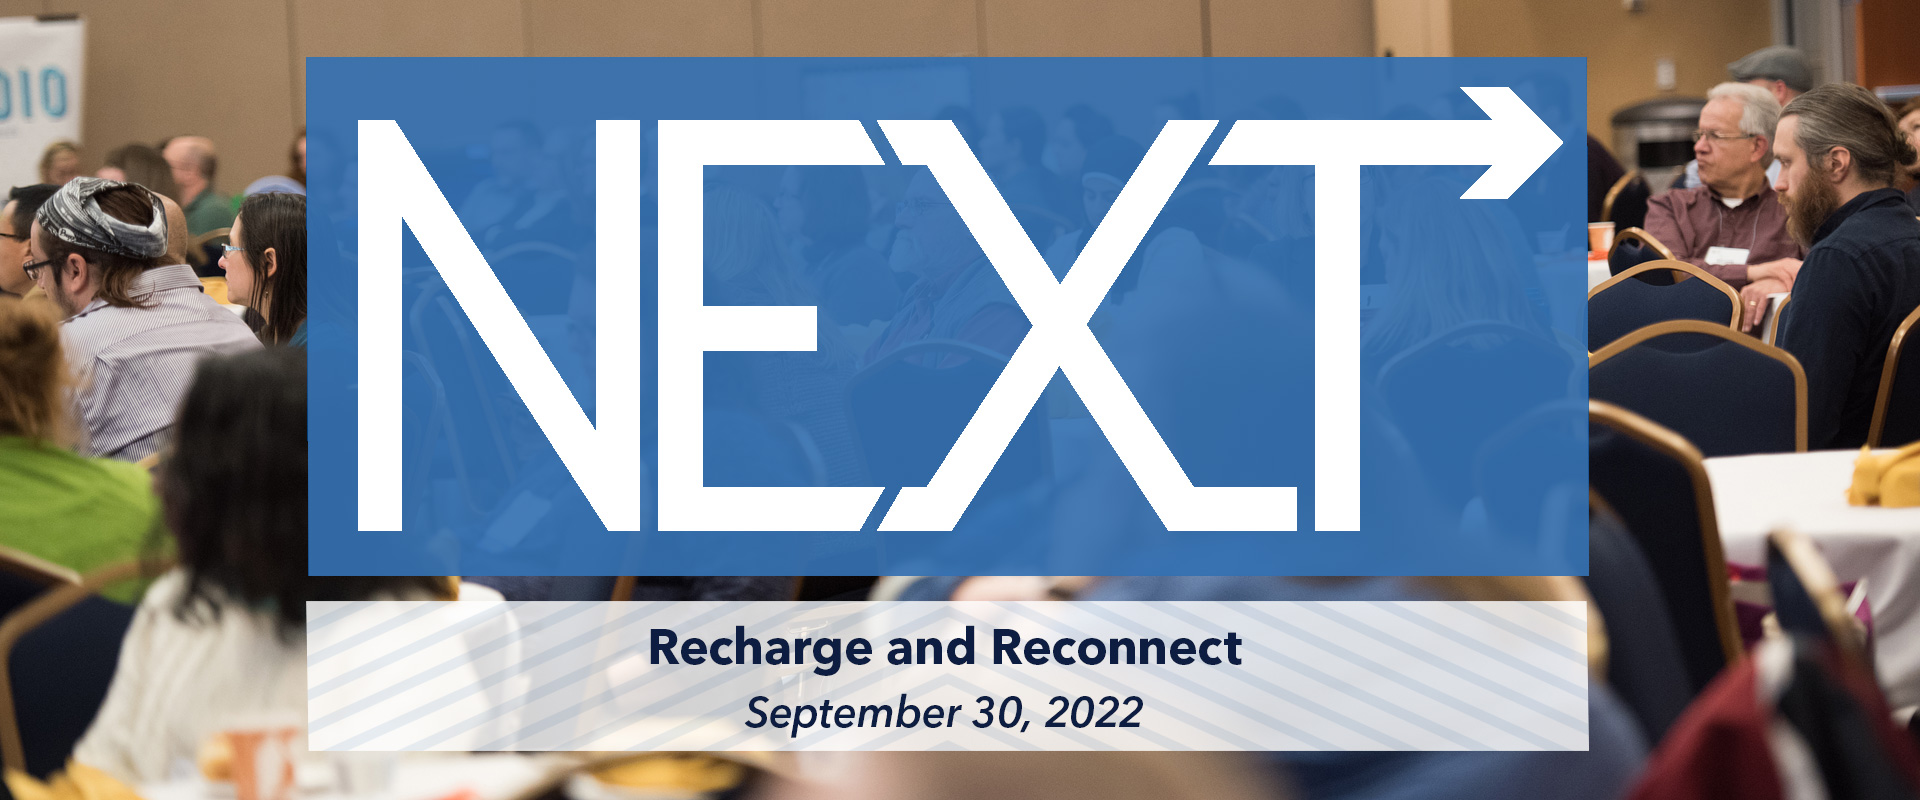 NEXT 2022 - Recharge and Reconnect - September 30, 2022